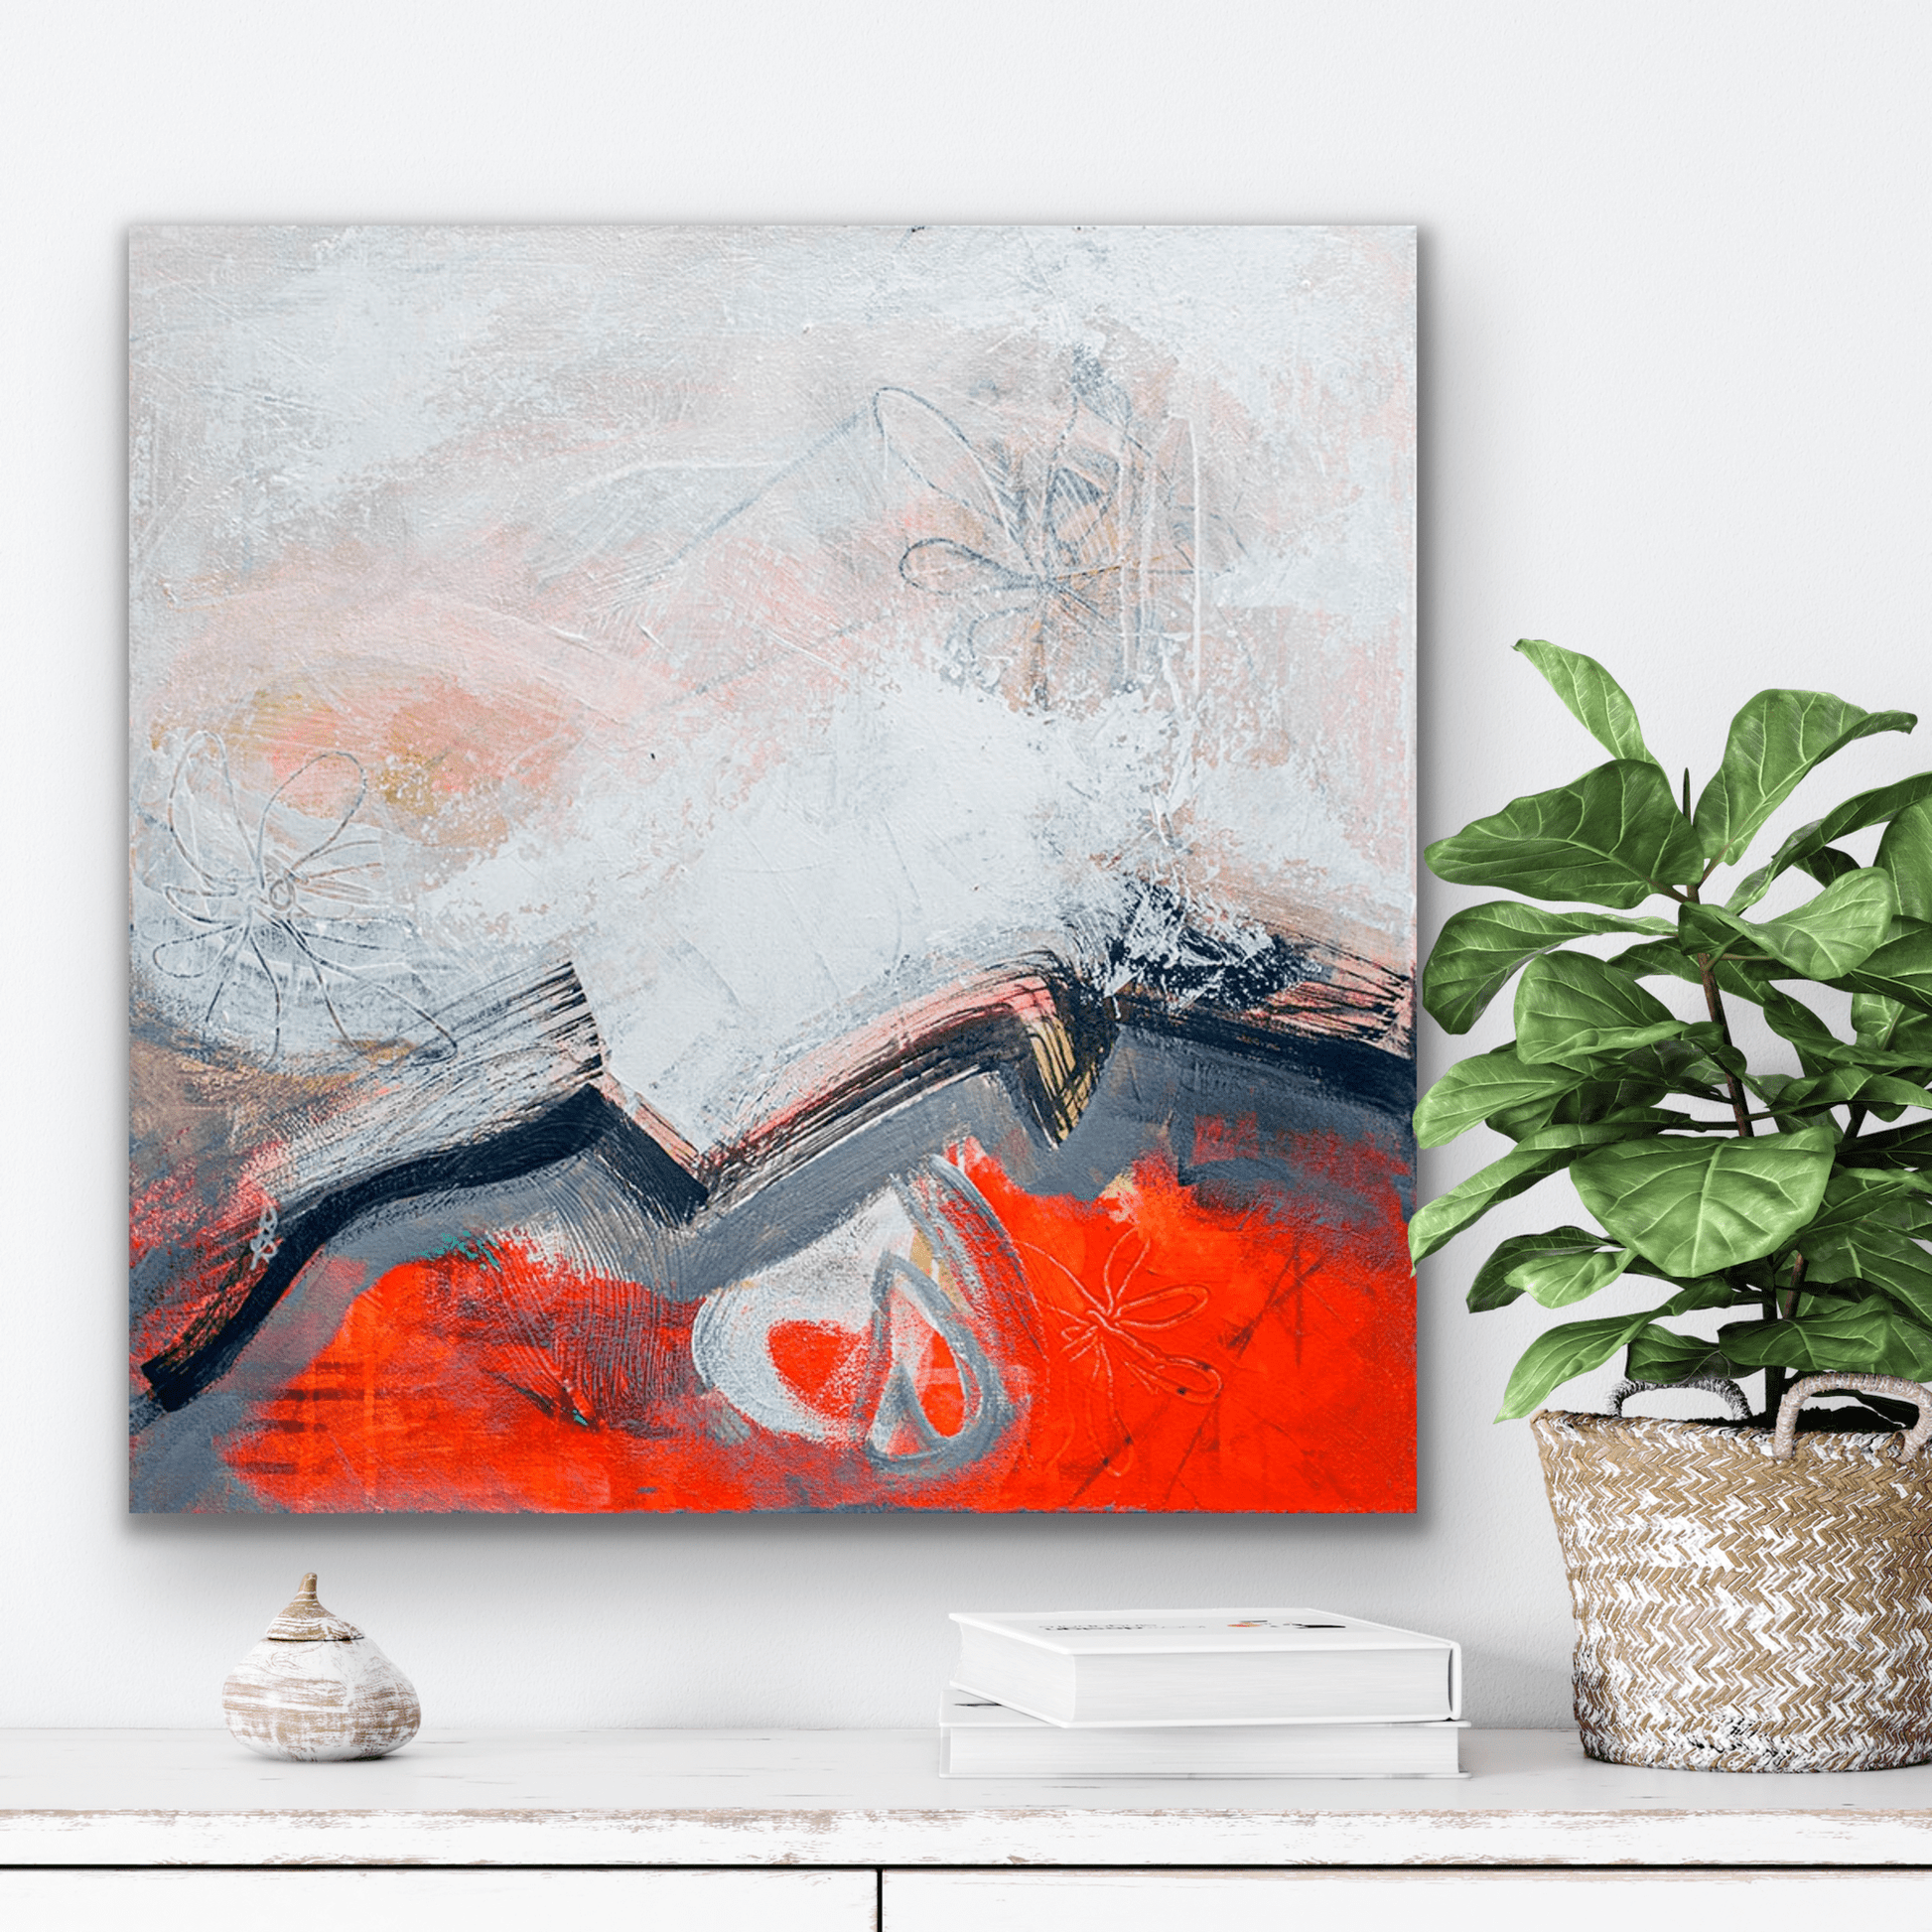 "Mother Moon" original artwork is on a gallery wrapped canvas.